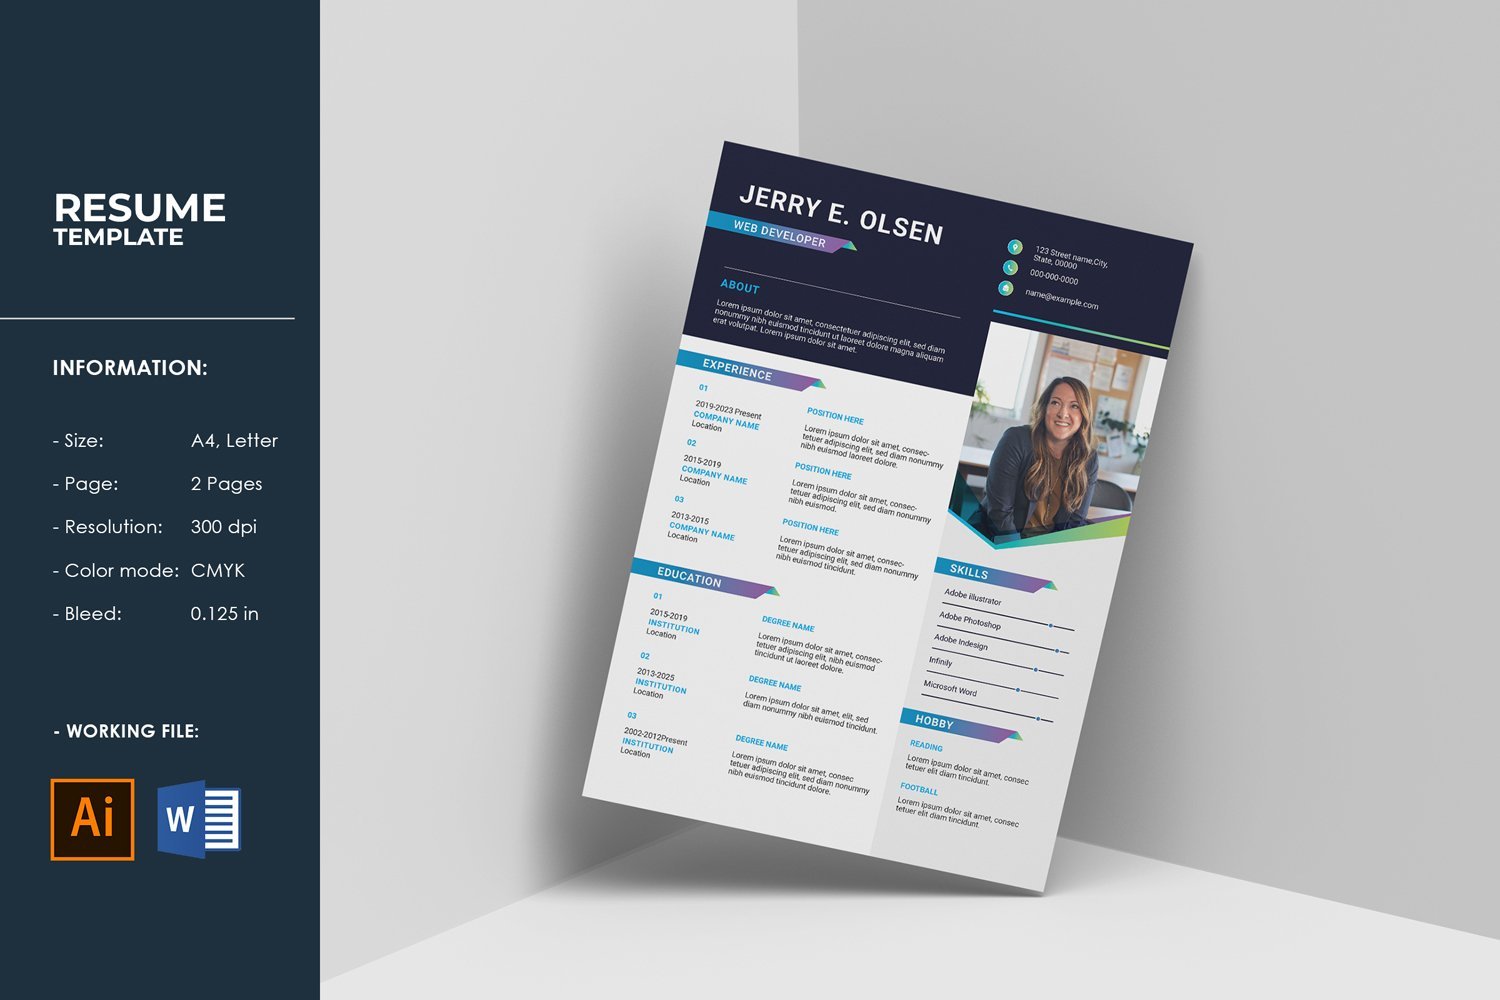 Template #377846 Resume Clean Webdesign Template - Logo template Preview